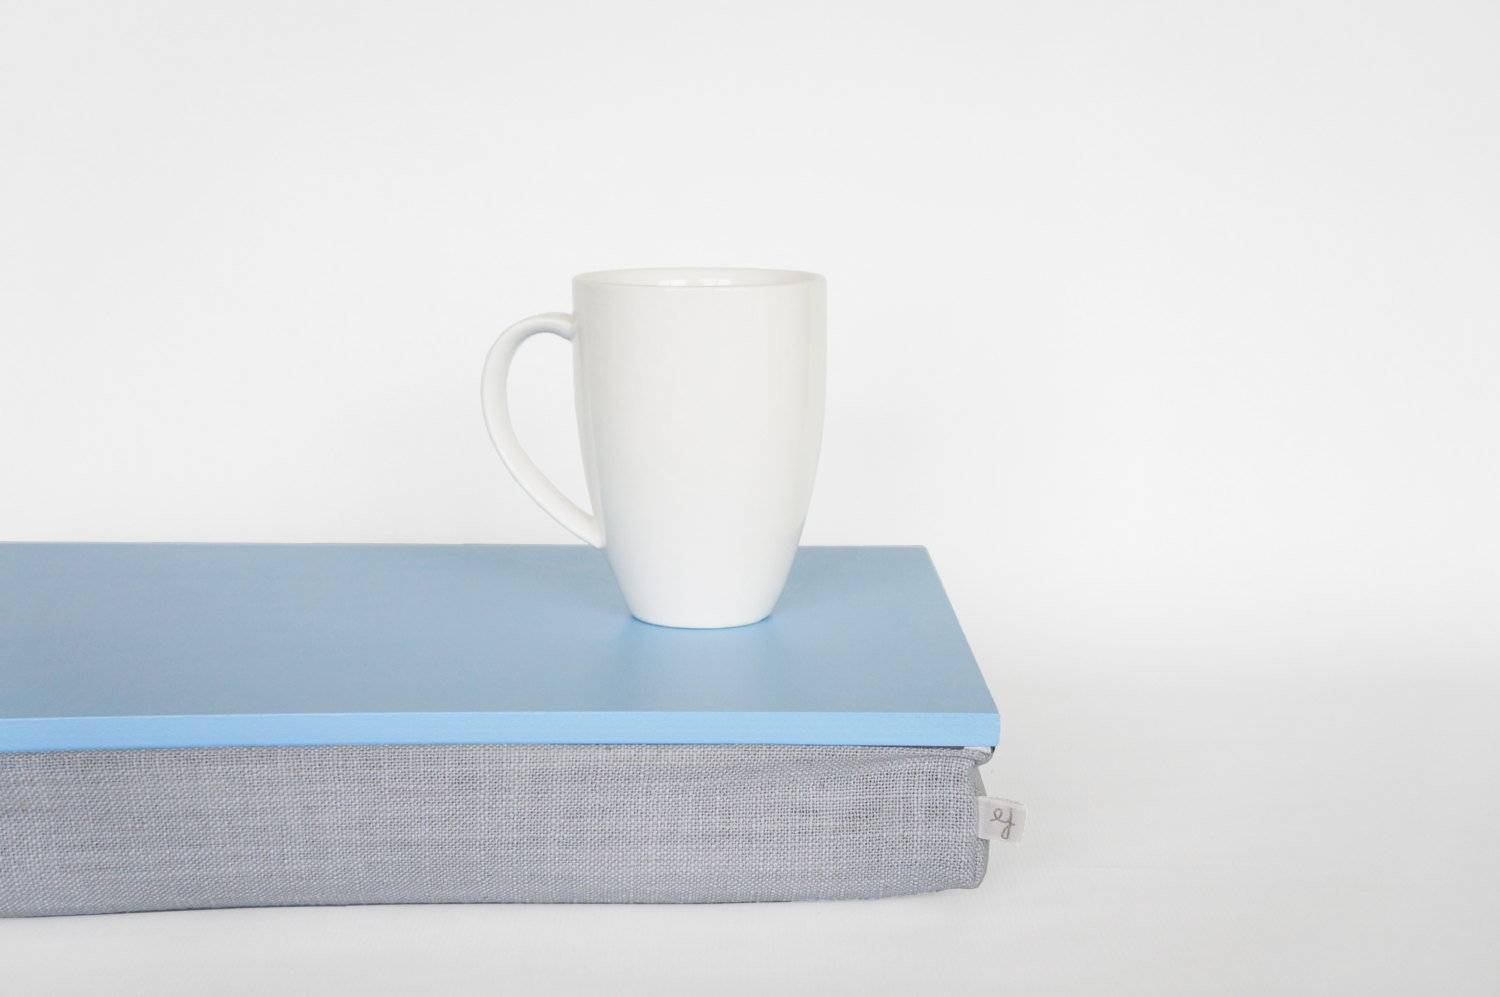 Primary image for Breakfast Serving tray with pillow without edges - light blue with Grey cotton l